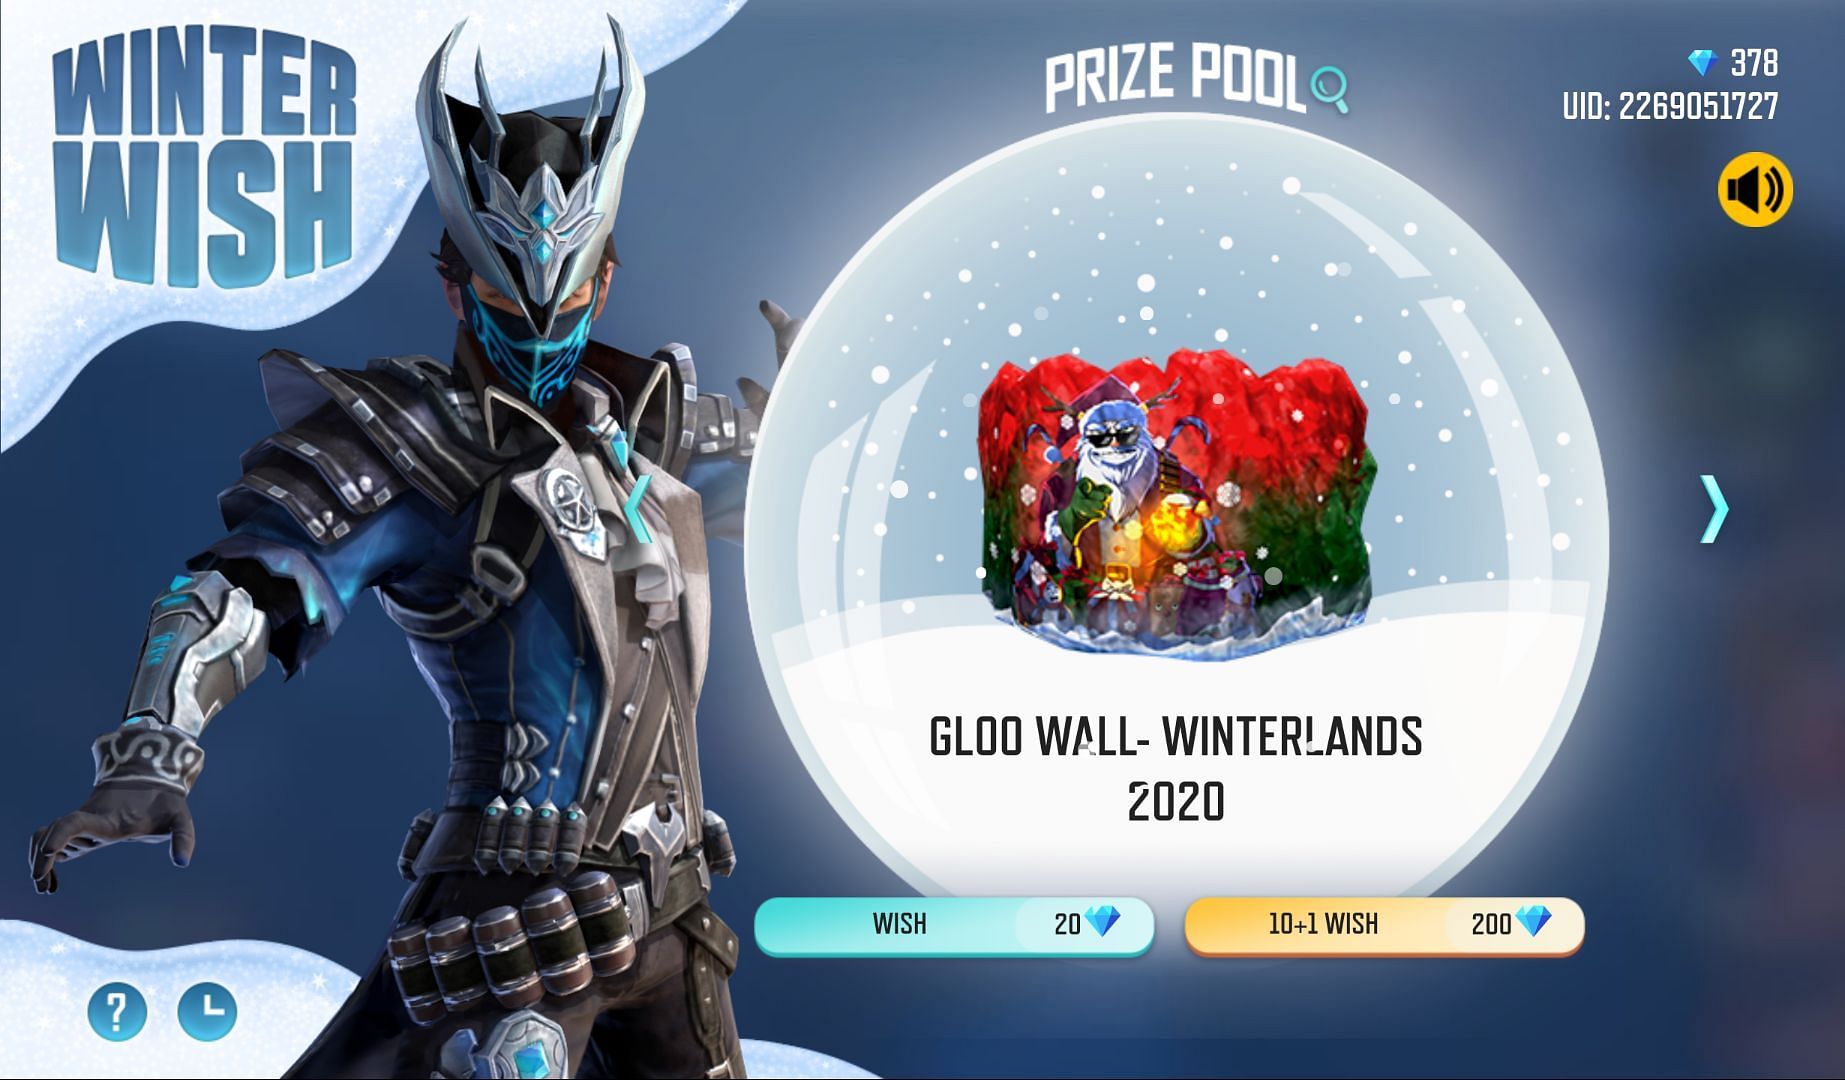 Gloo Wall - Winterlands 2020 is available at the moment (Image via Free Fire)